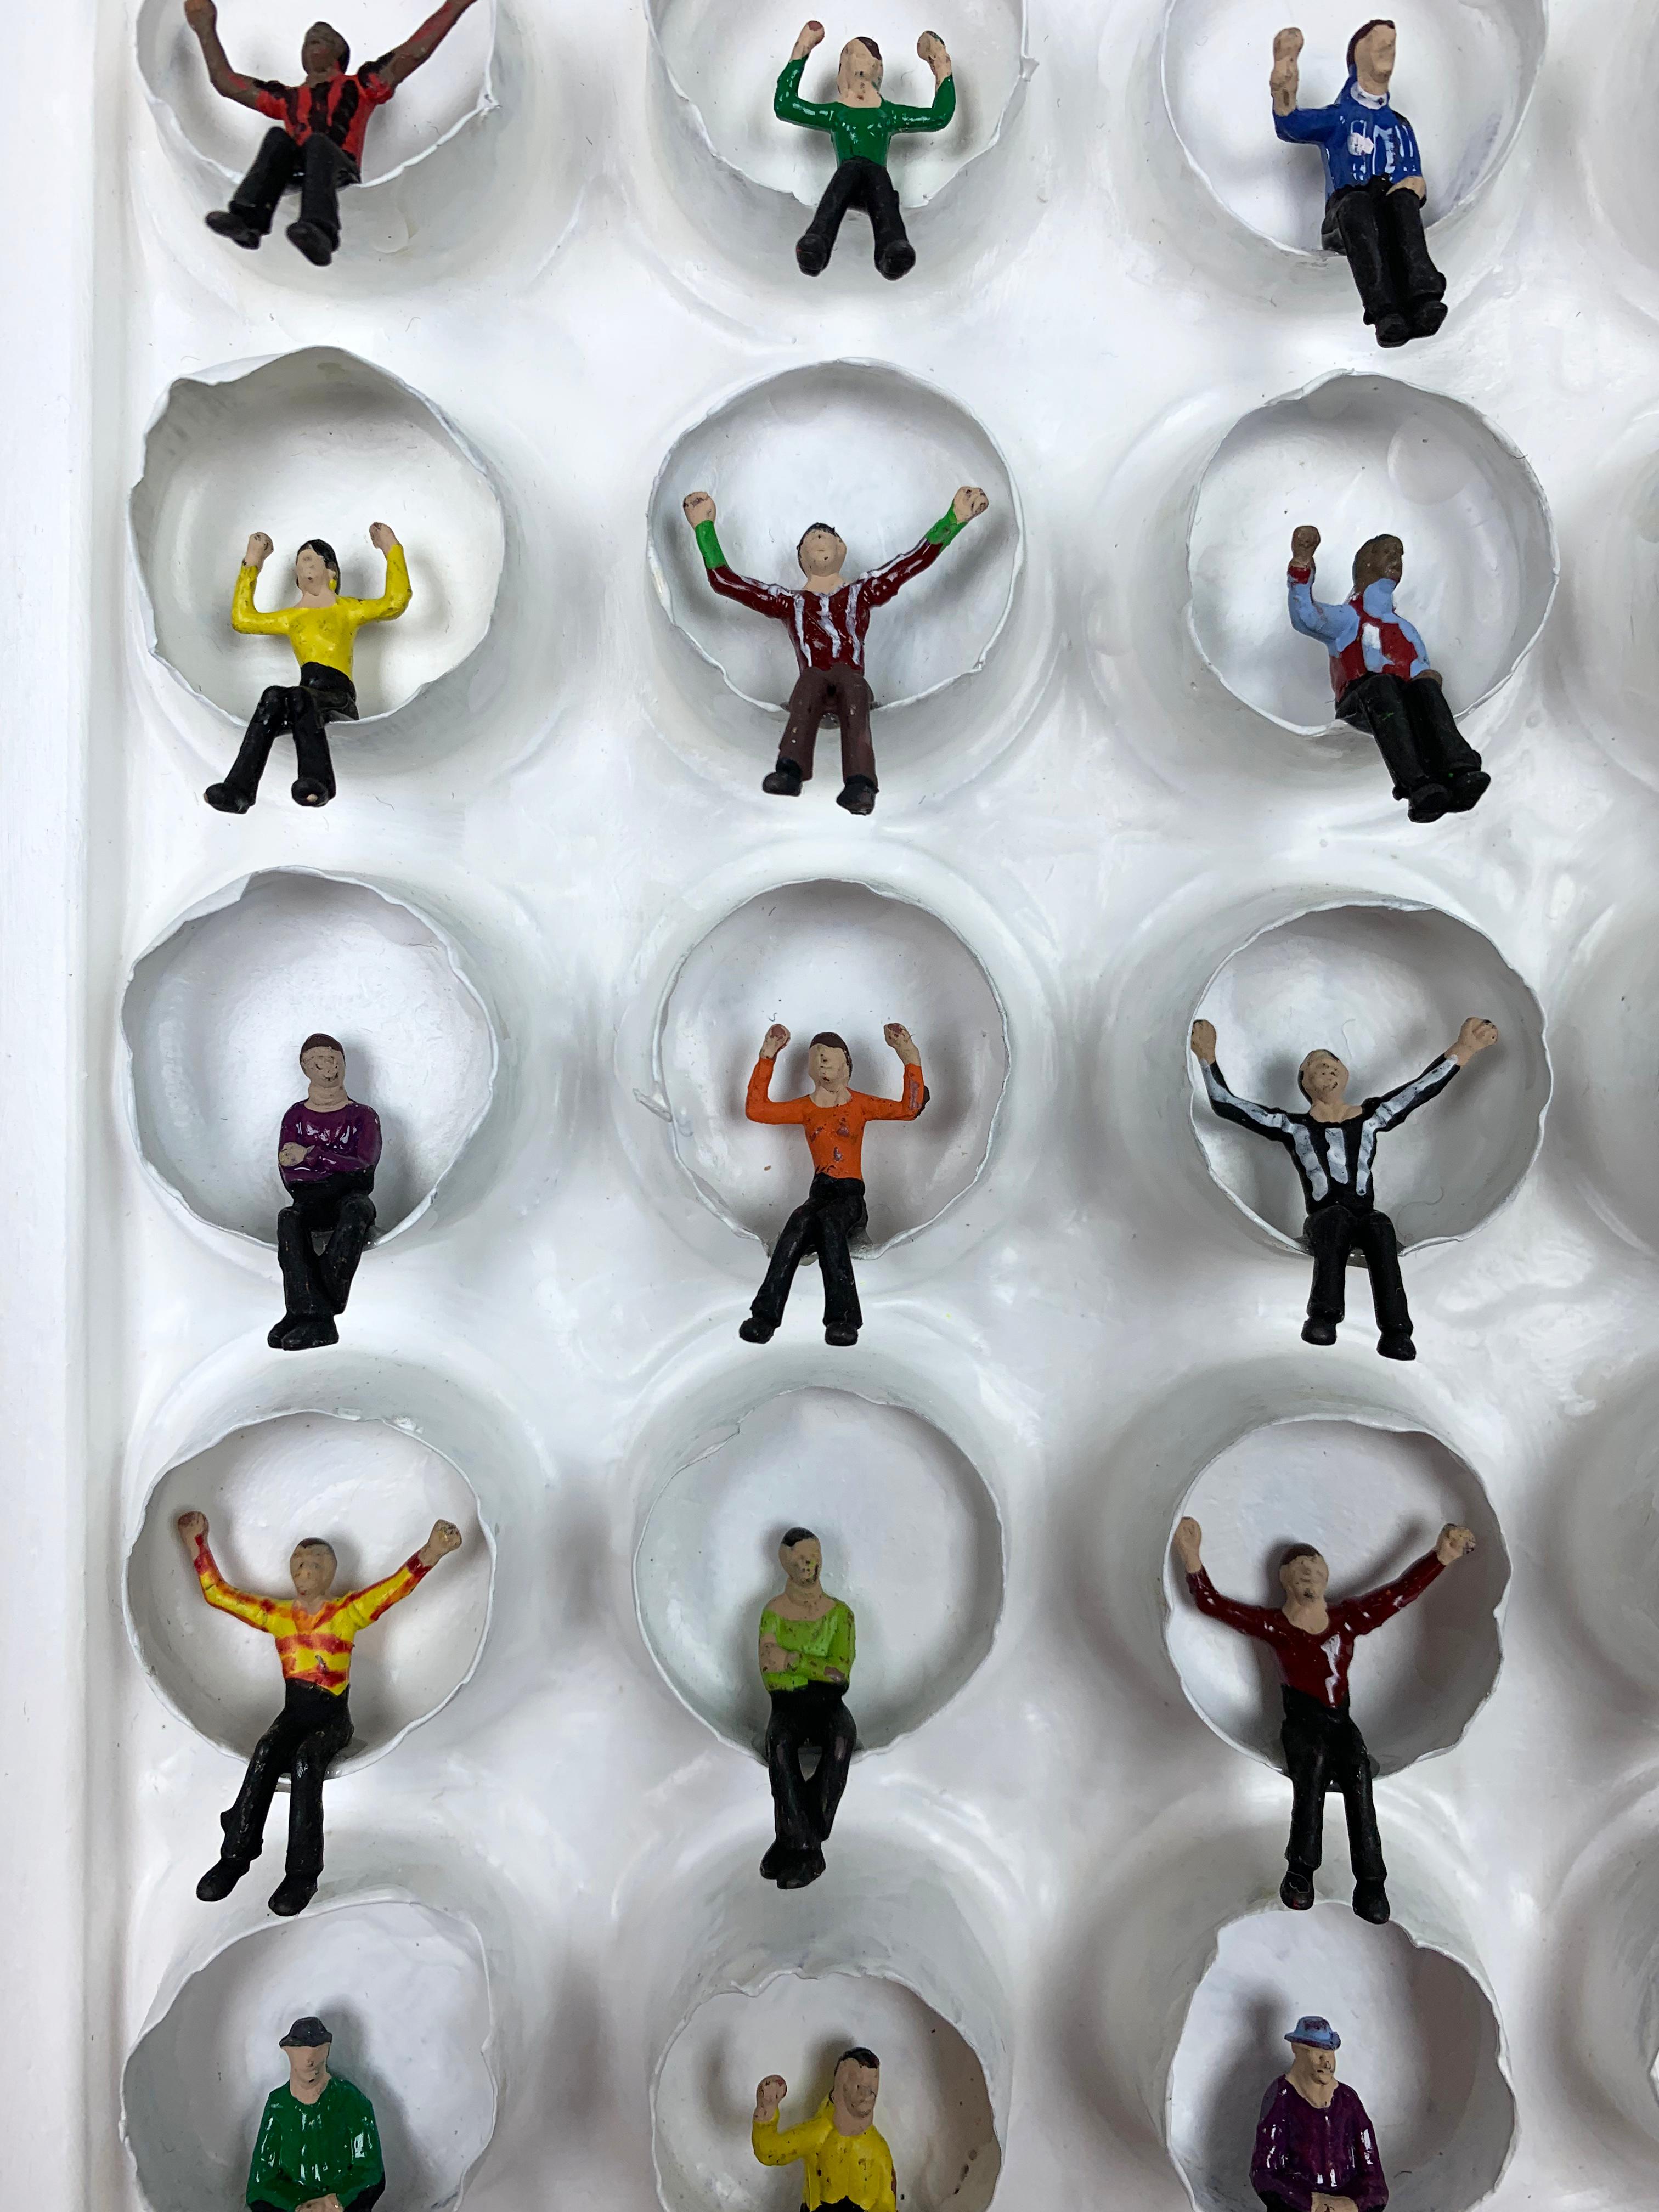 Celebrate by Mat Kemp, 2019

Created using recycled Nespresso capsules, Subbuteo figures, acrylic paint, marbles and wood.

Mat Kemp is an English artist with an outstanding academic background:
 
School of Communication Arts 1990.
Royal College of